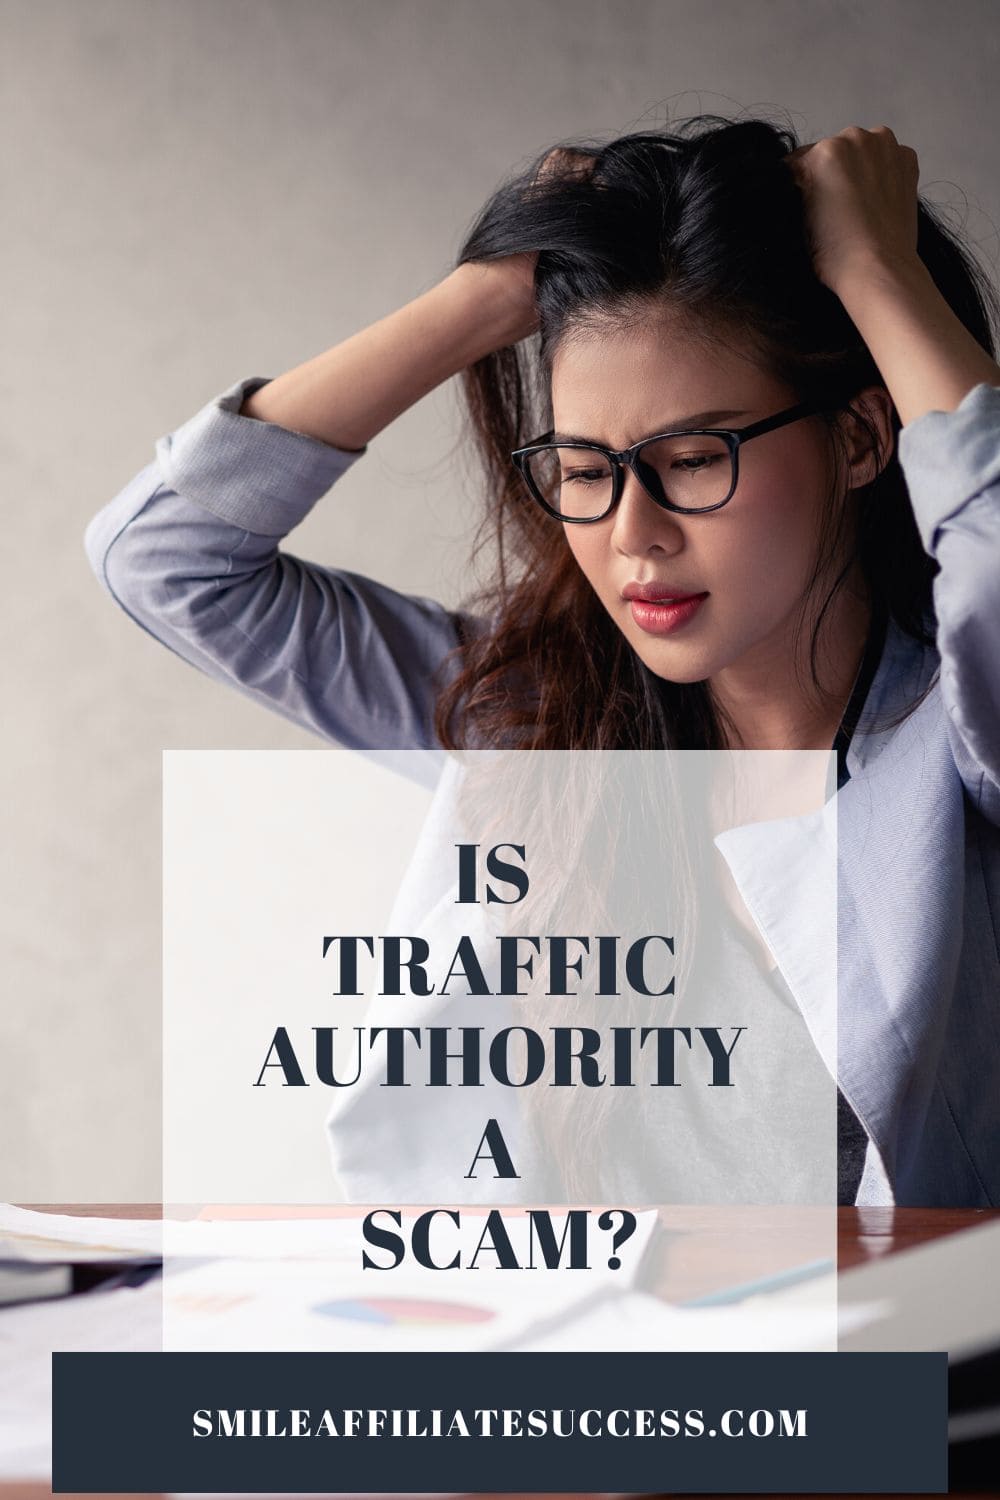 What Is Traffic Authority About?